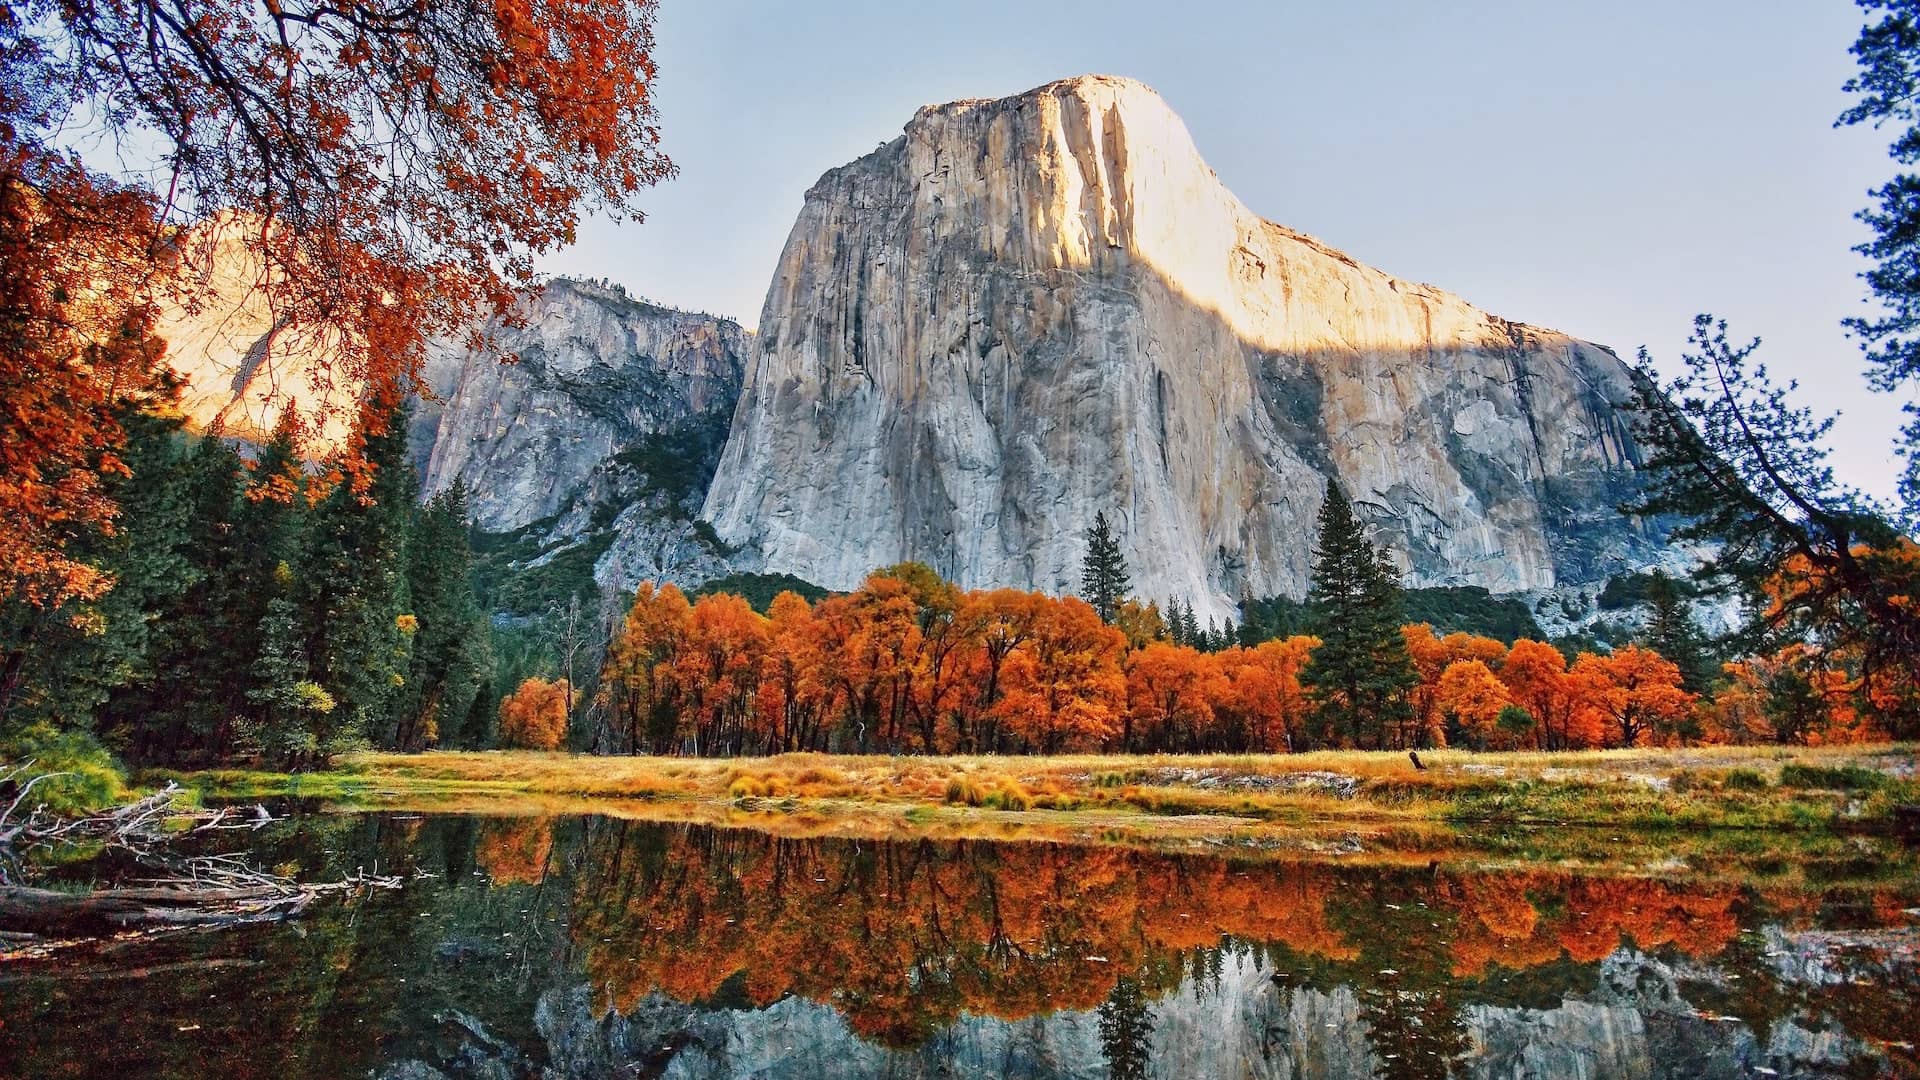 Yosemite Backpacking: How to Plan the Best Backpacking Trip